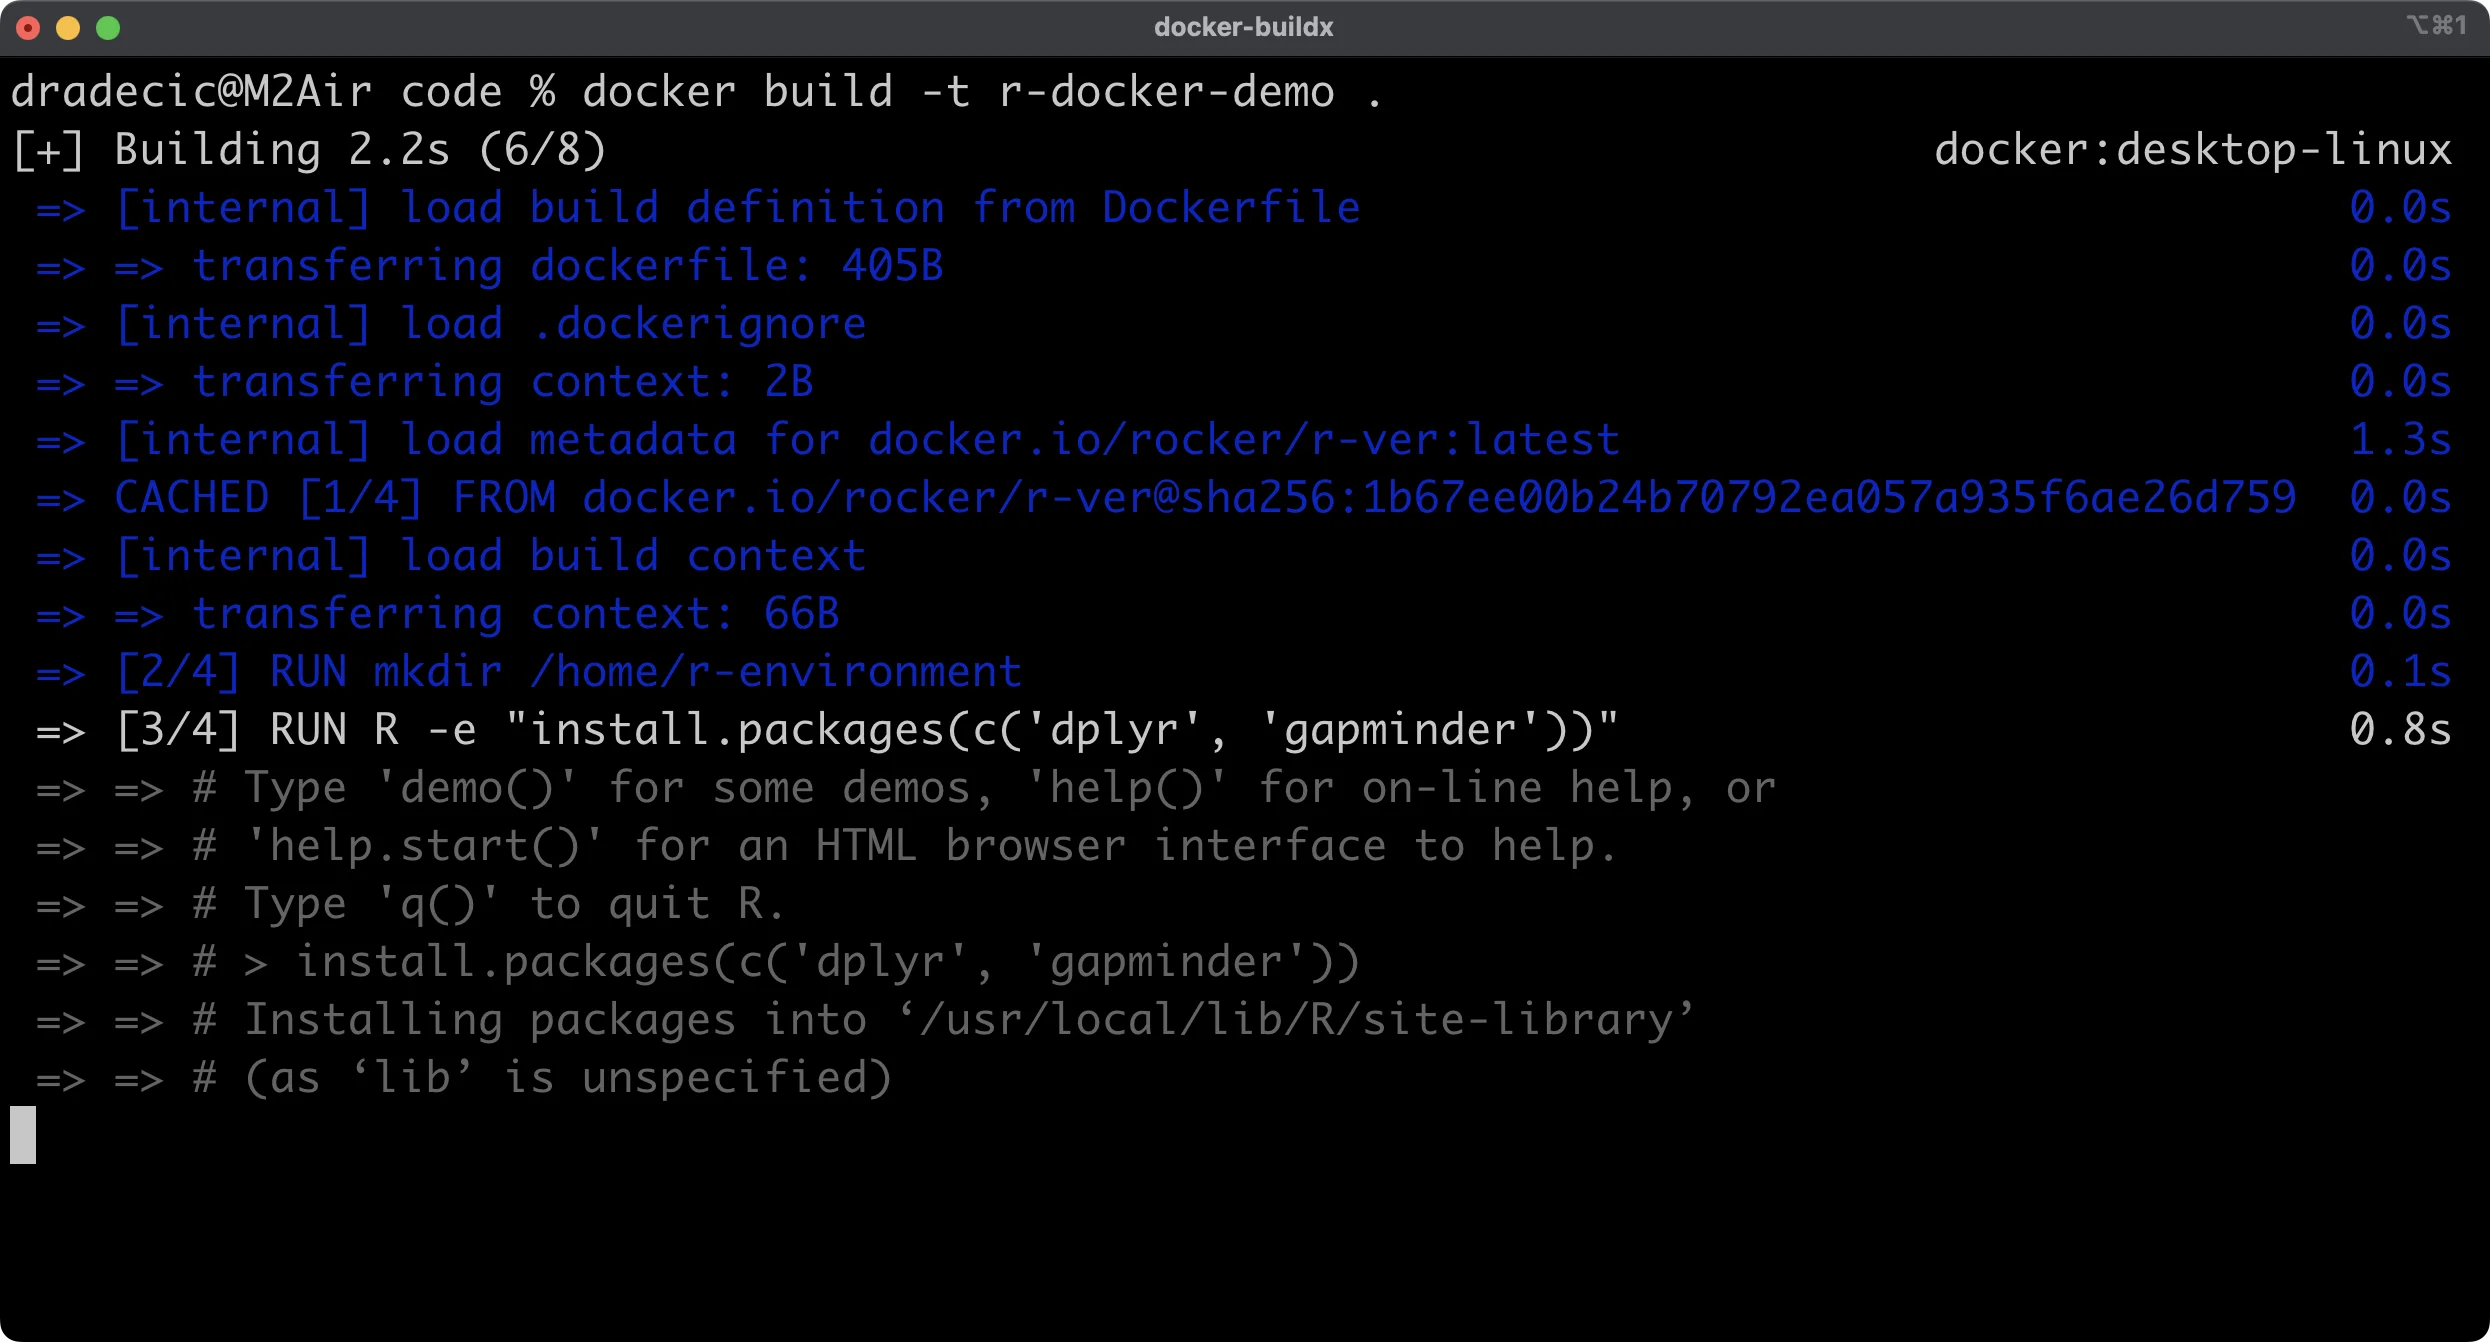 Image 3 - Building a container from Dockerfile